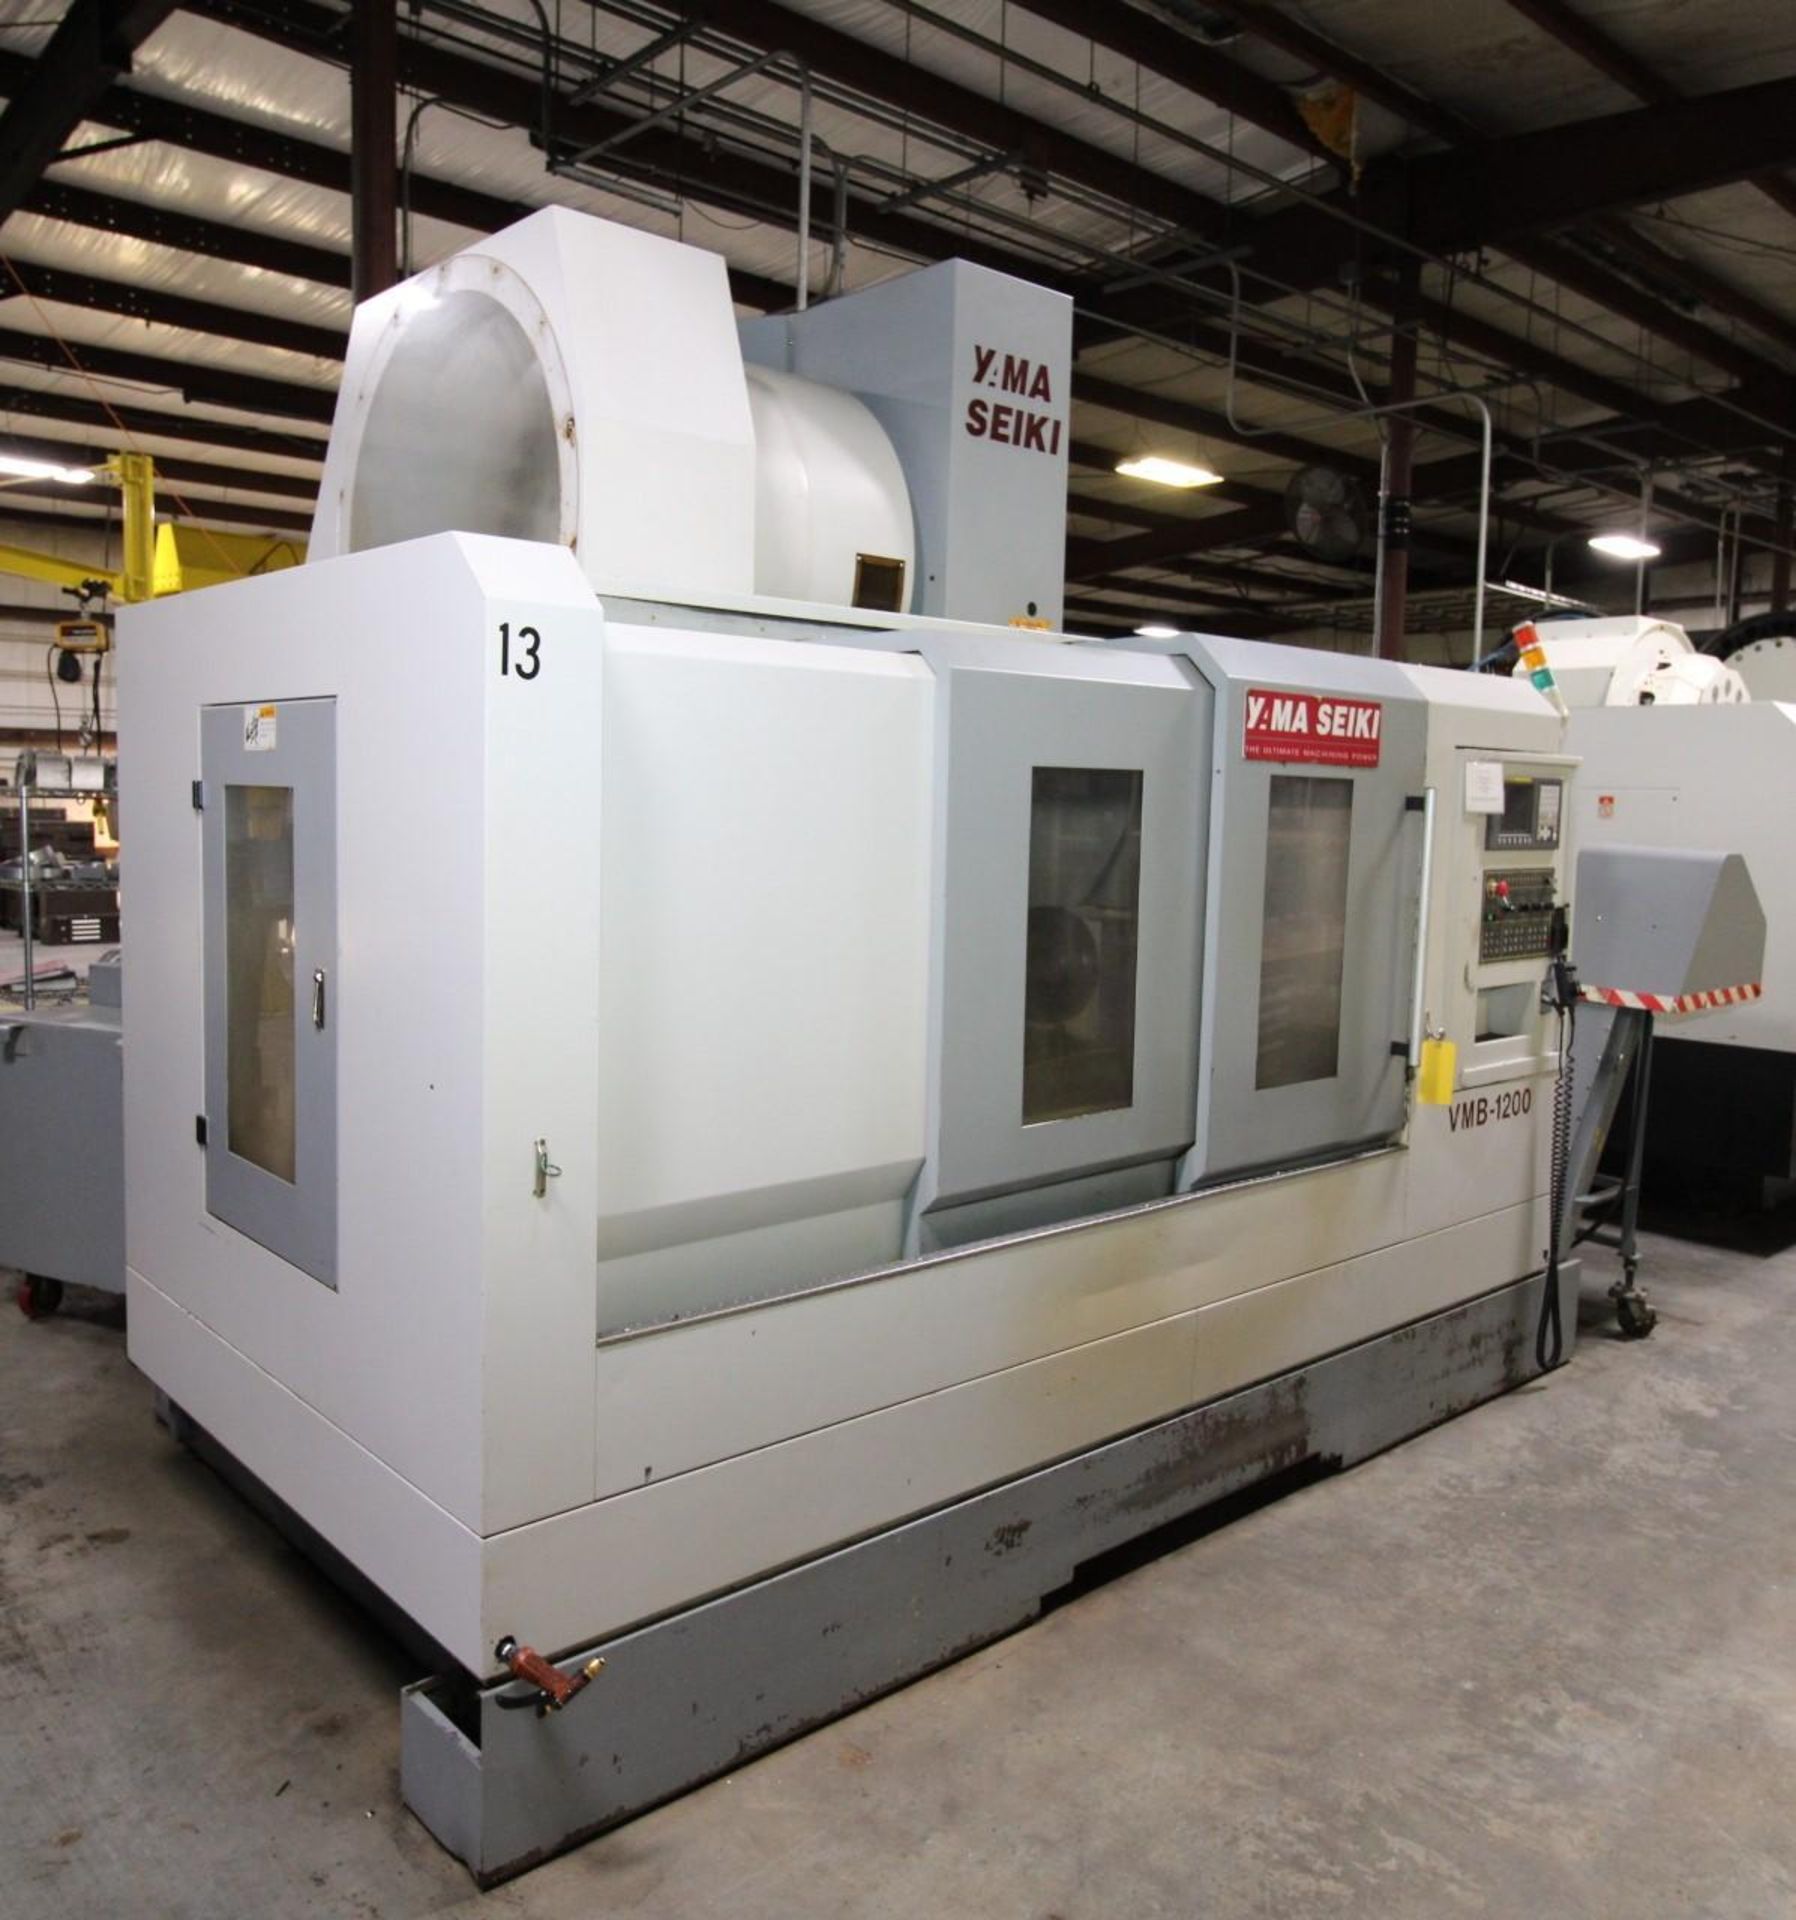 4-AXIS VERTICAL MACHINING CENTER, YAMA SEIKI MDL. VMB-1200, new 2006, installed new 2007, Fanuc Oi- - Image 15 of 17